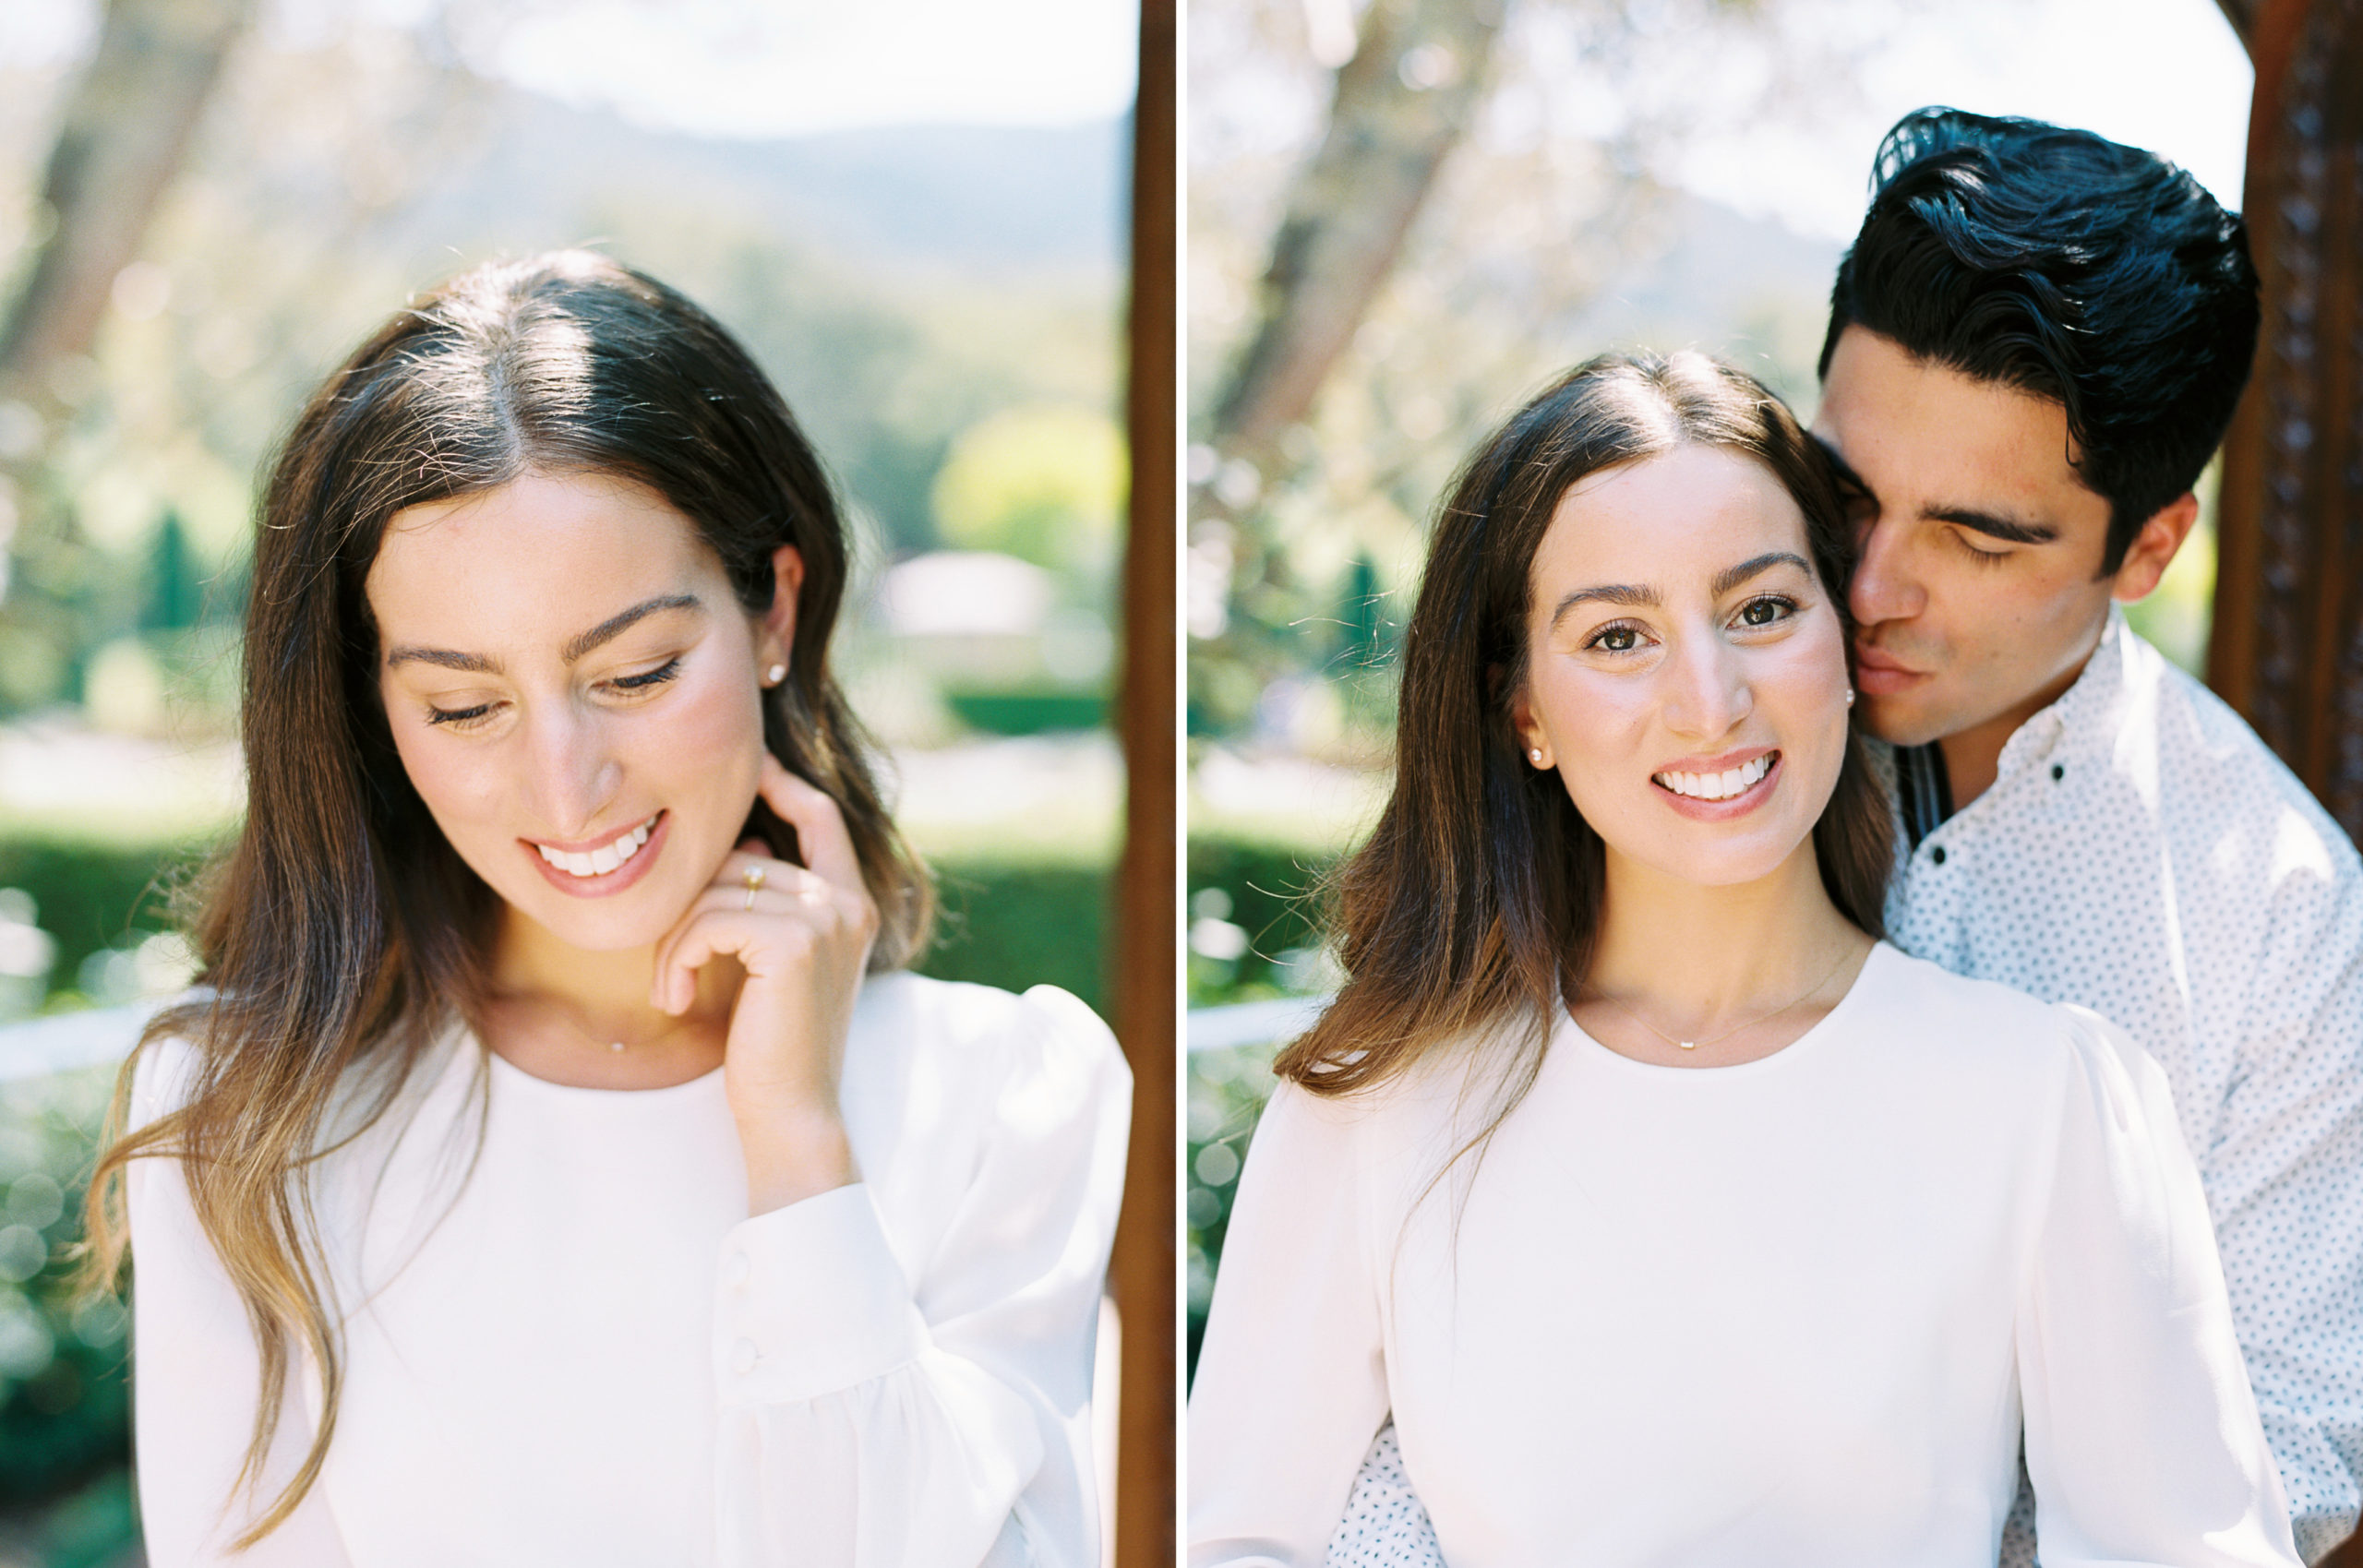 Engagement session poses 